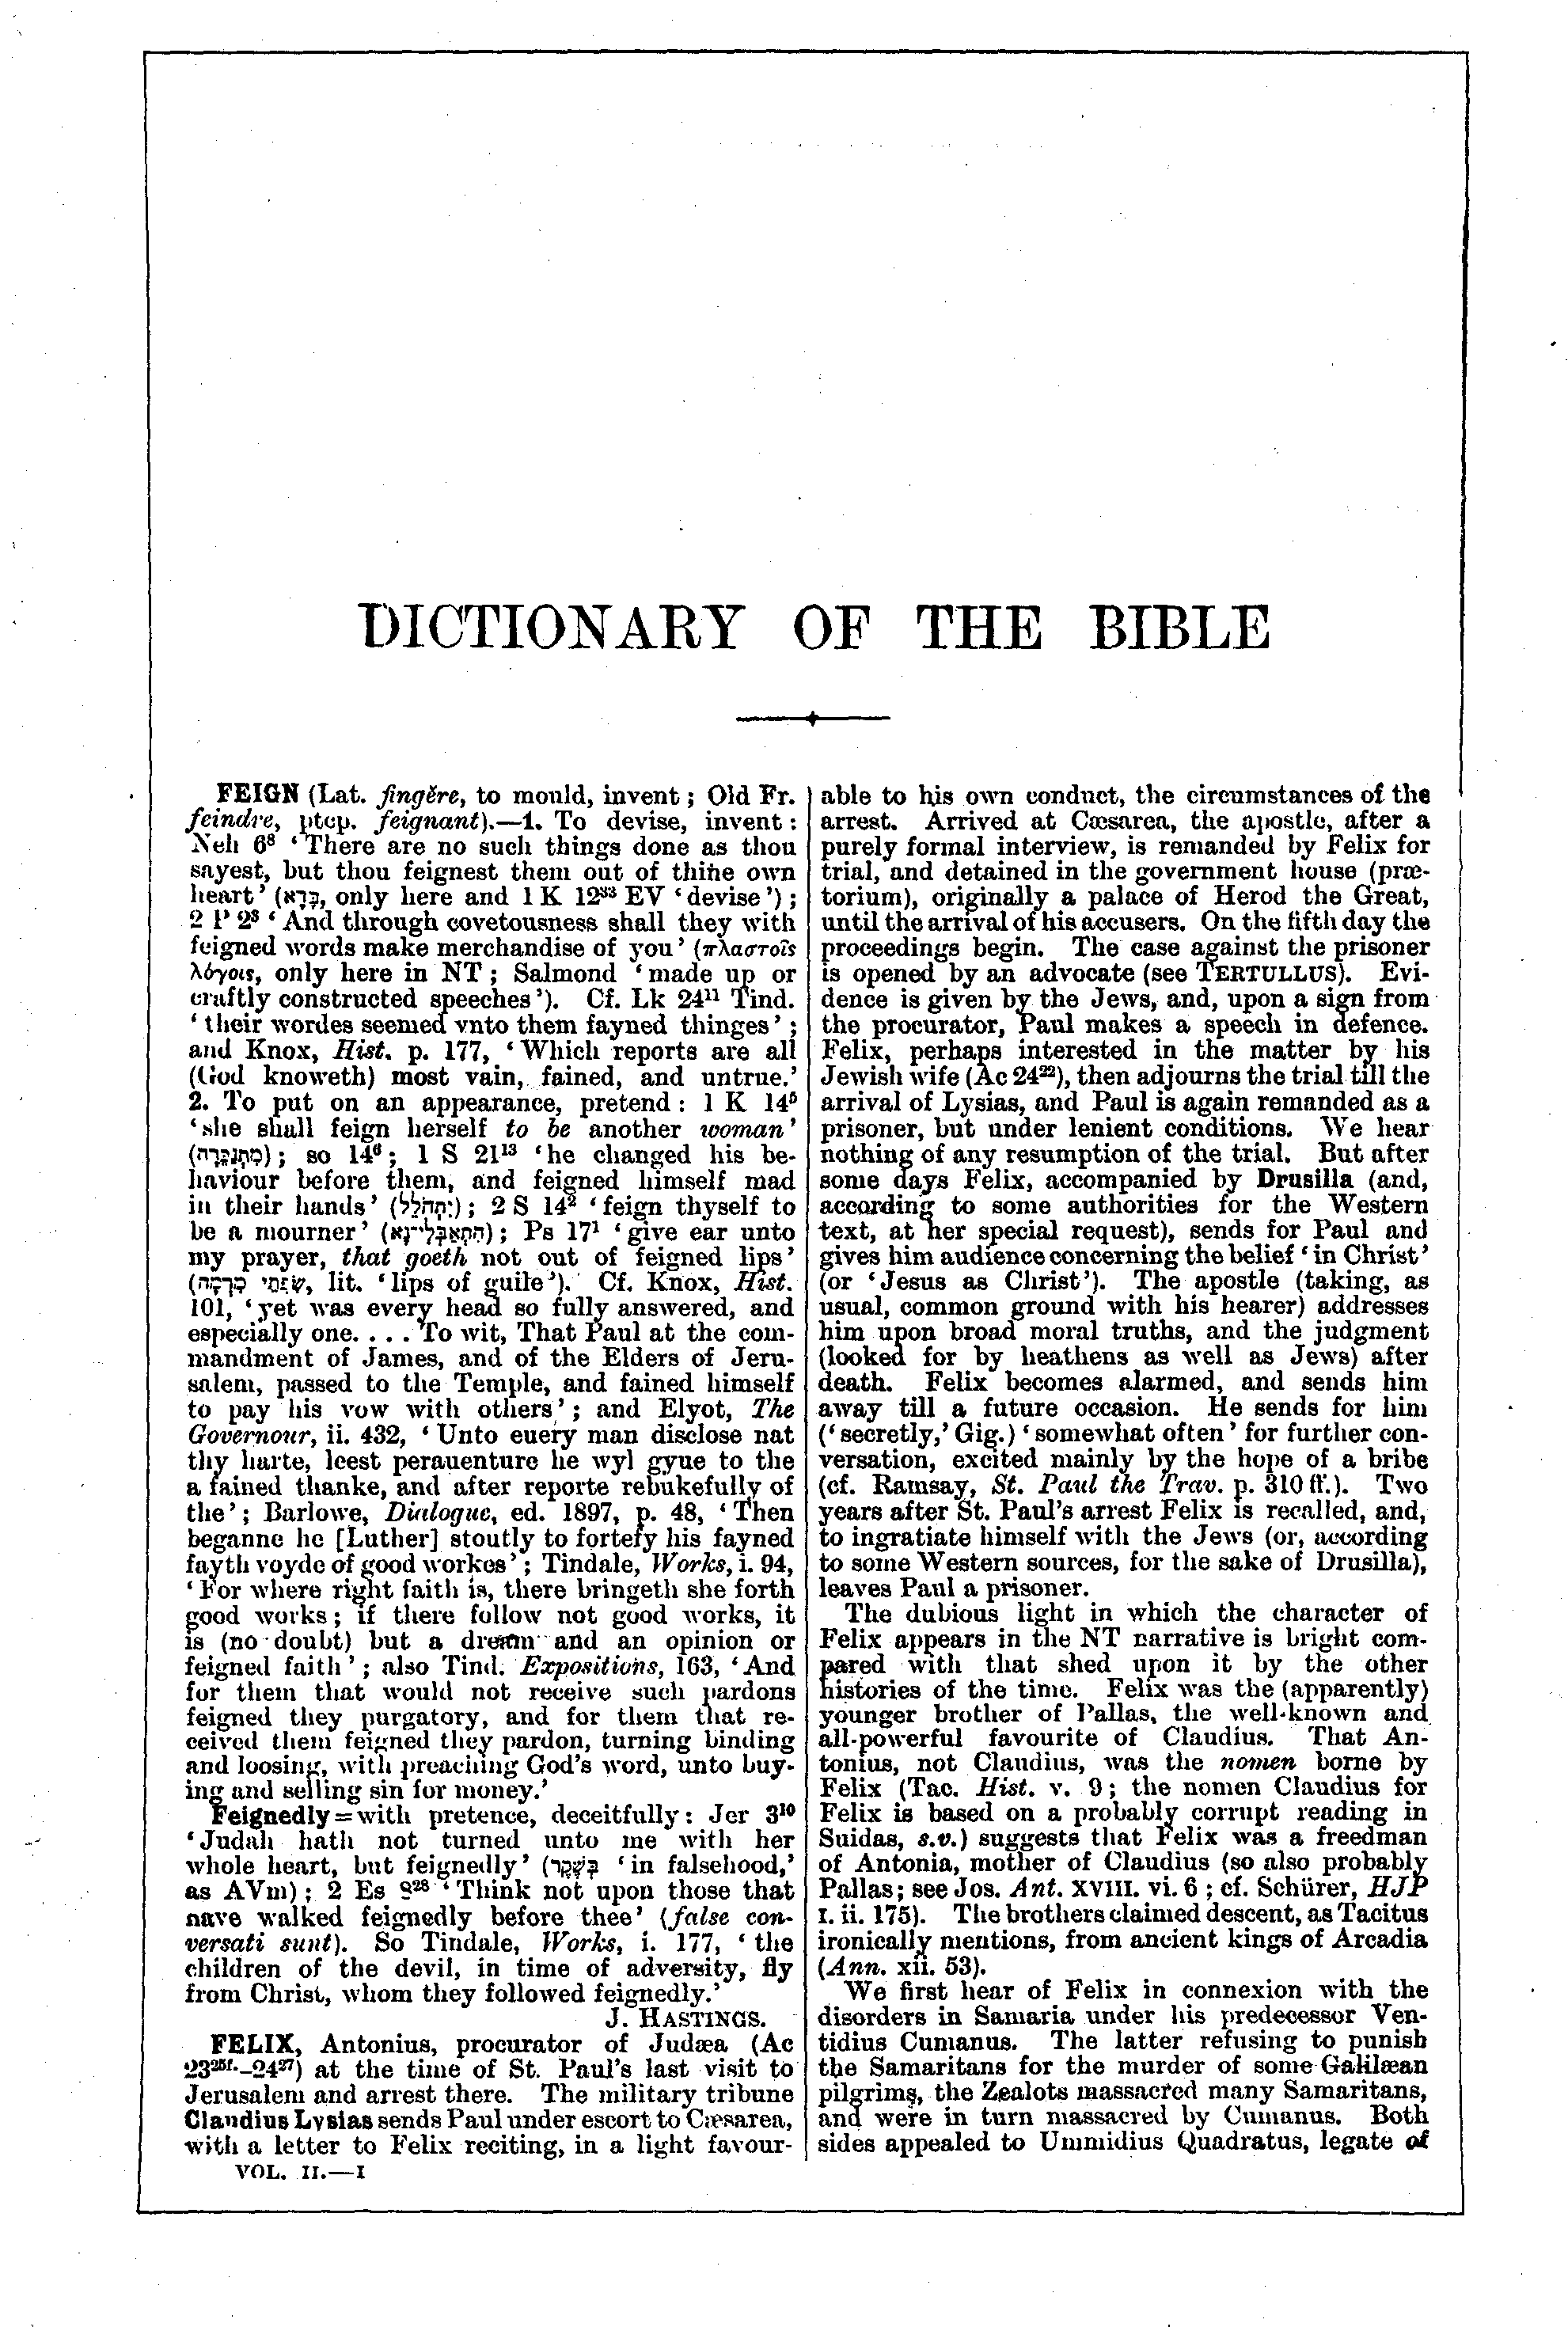 Image of page 1